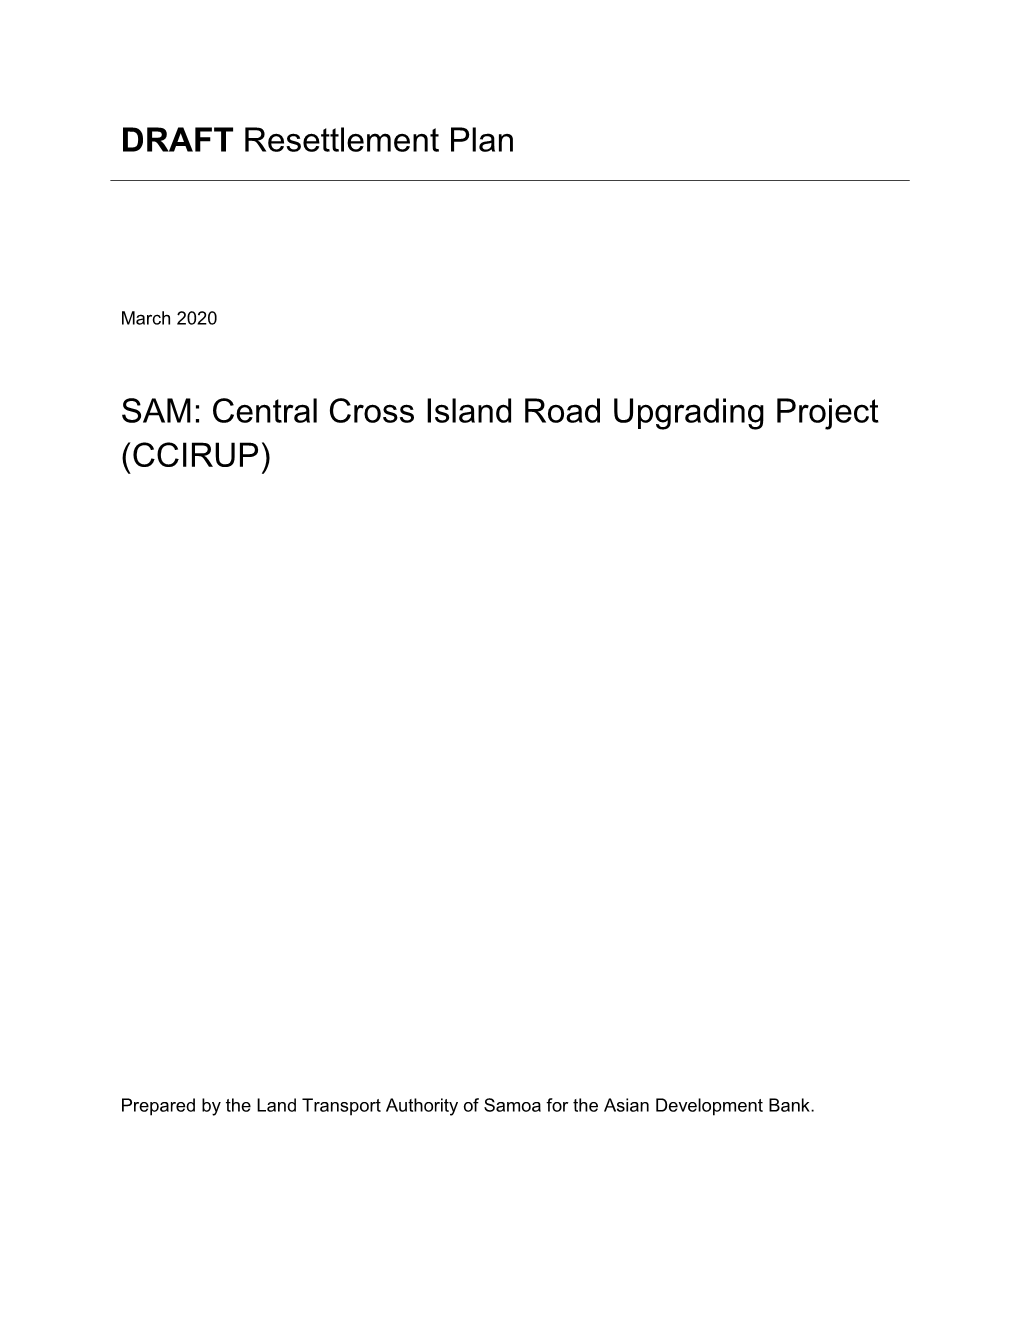 51268-001: Central Cross Island Road Upgrading Project